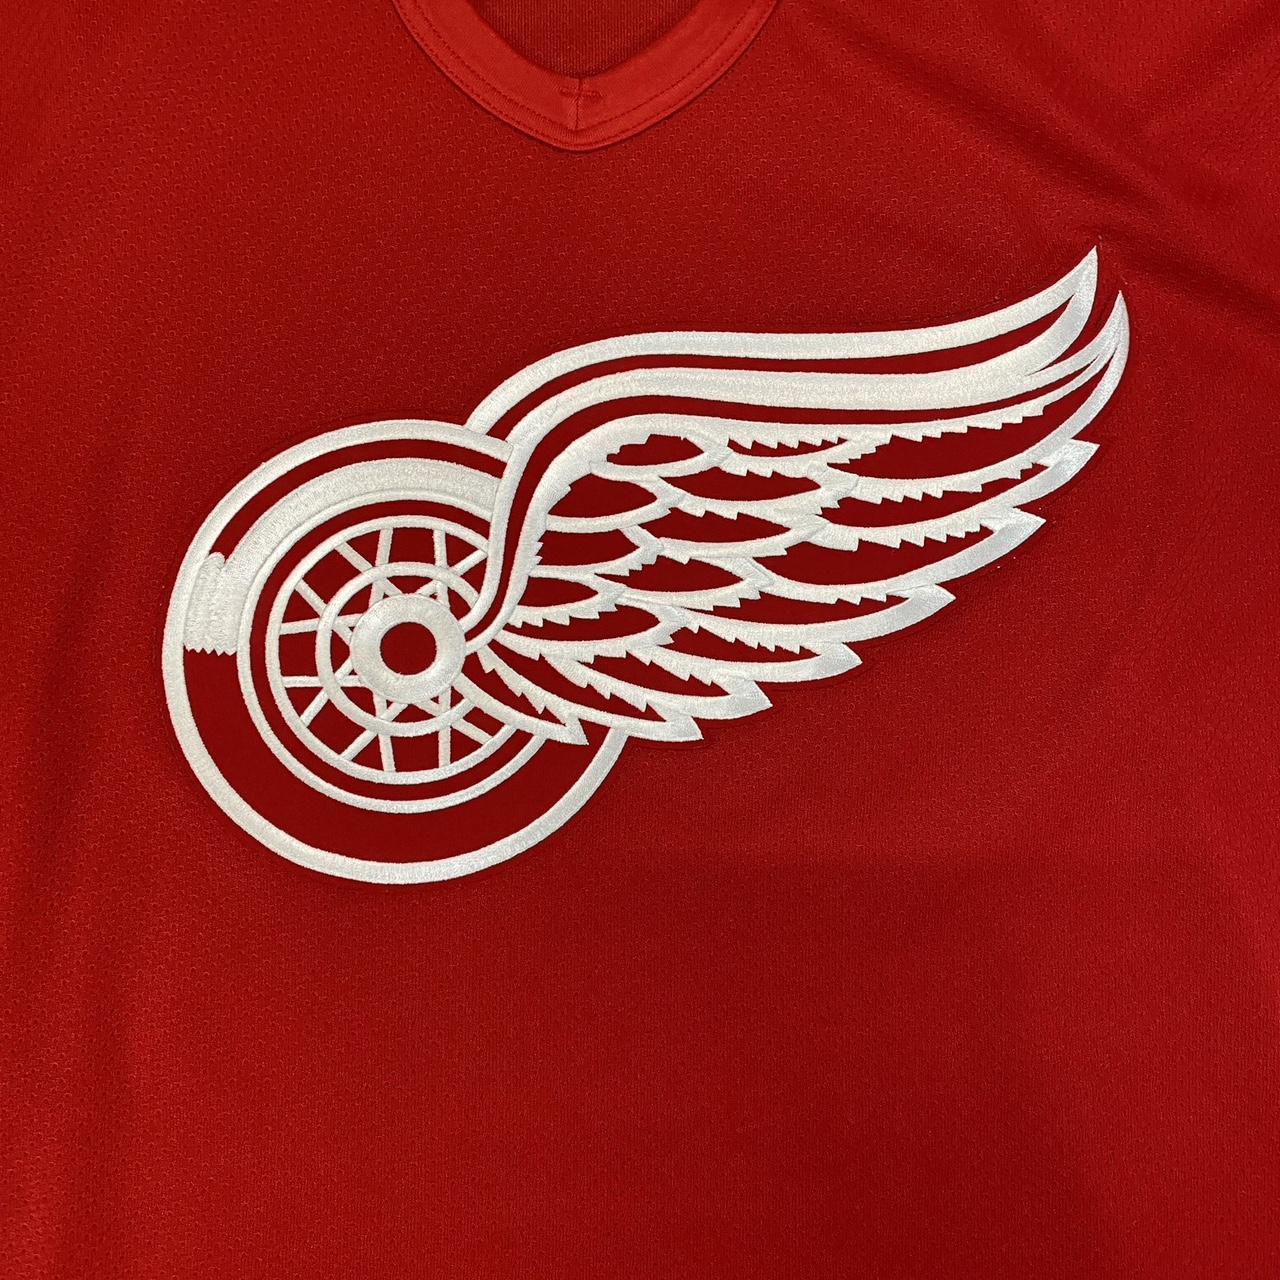 Vintage 1992 Detroit Red Wings Hockey Cotton Jersey Size M 